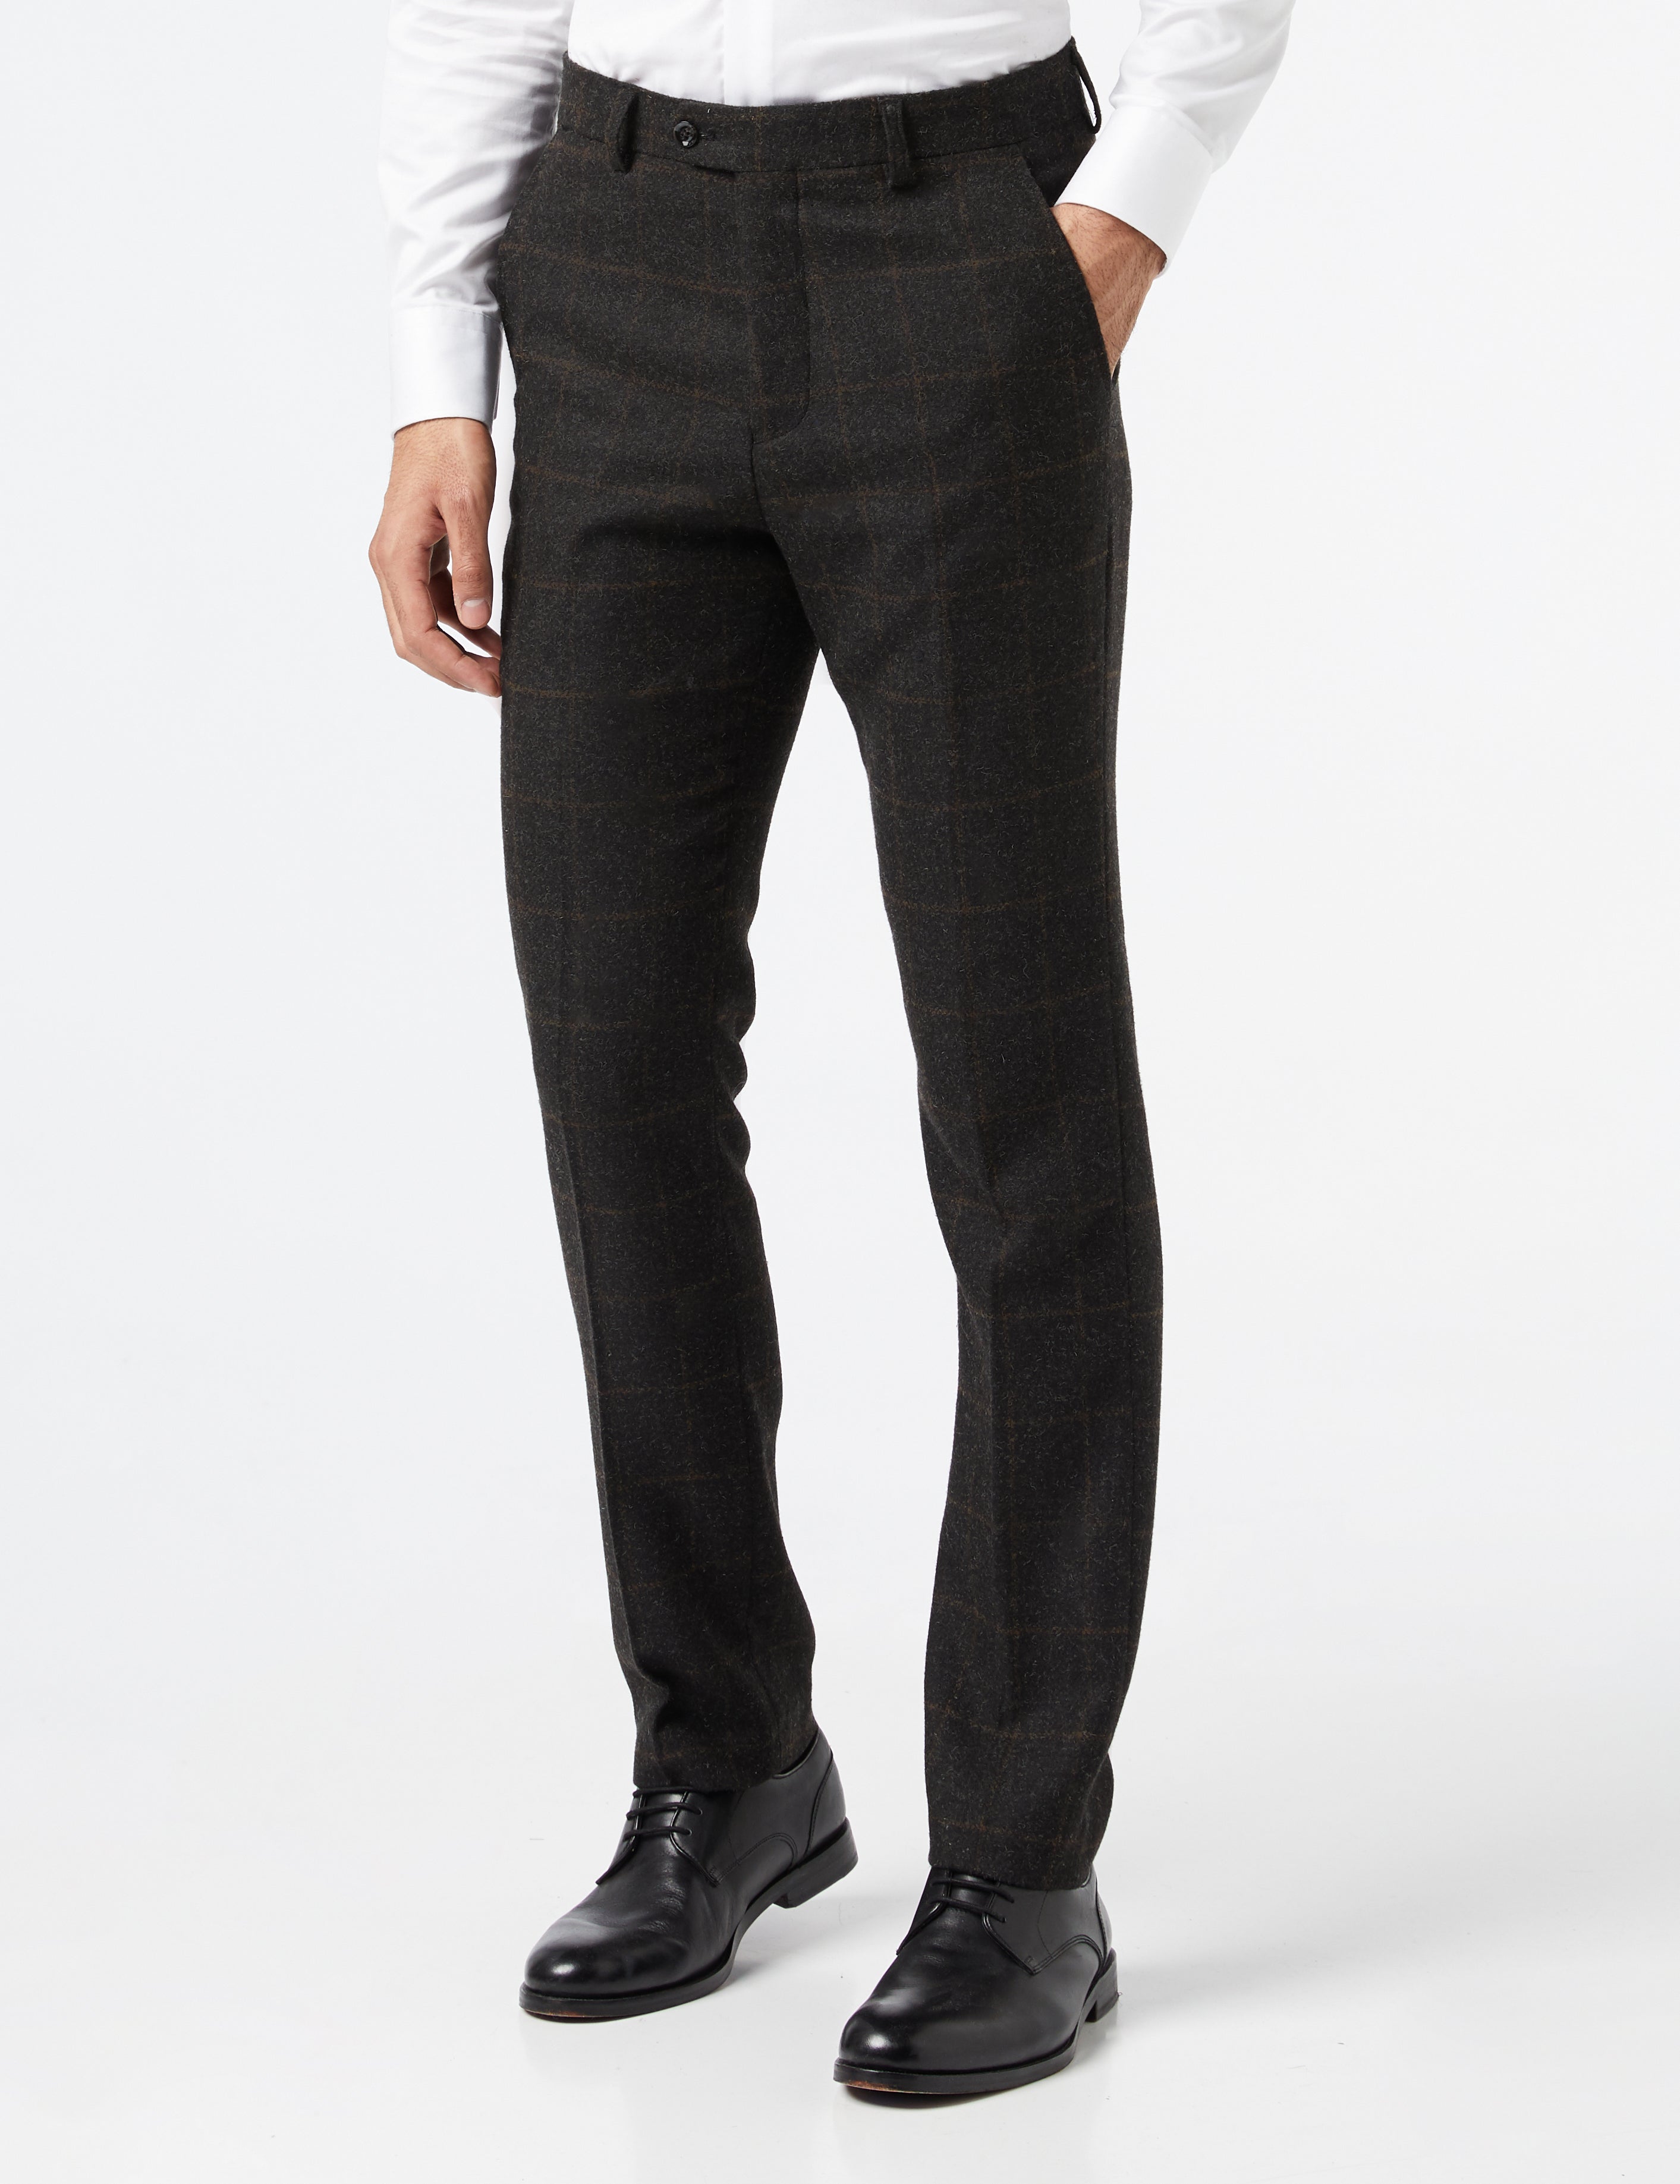 Black Tweed Check Suit – XPOSED